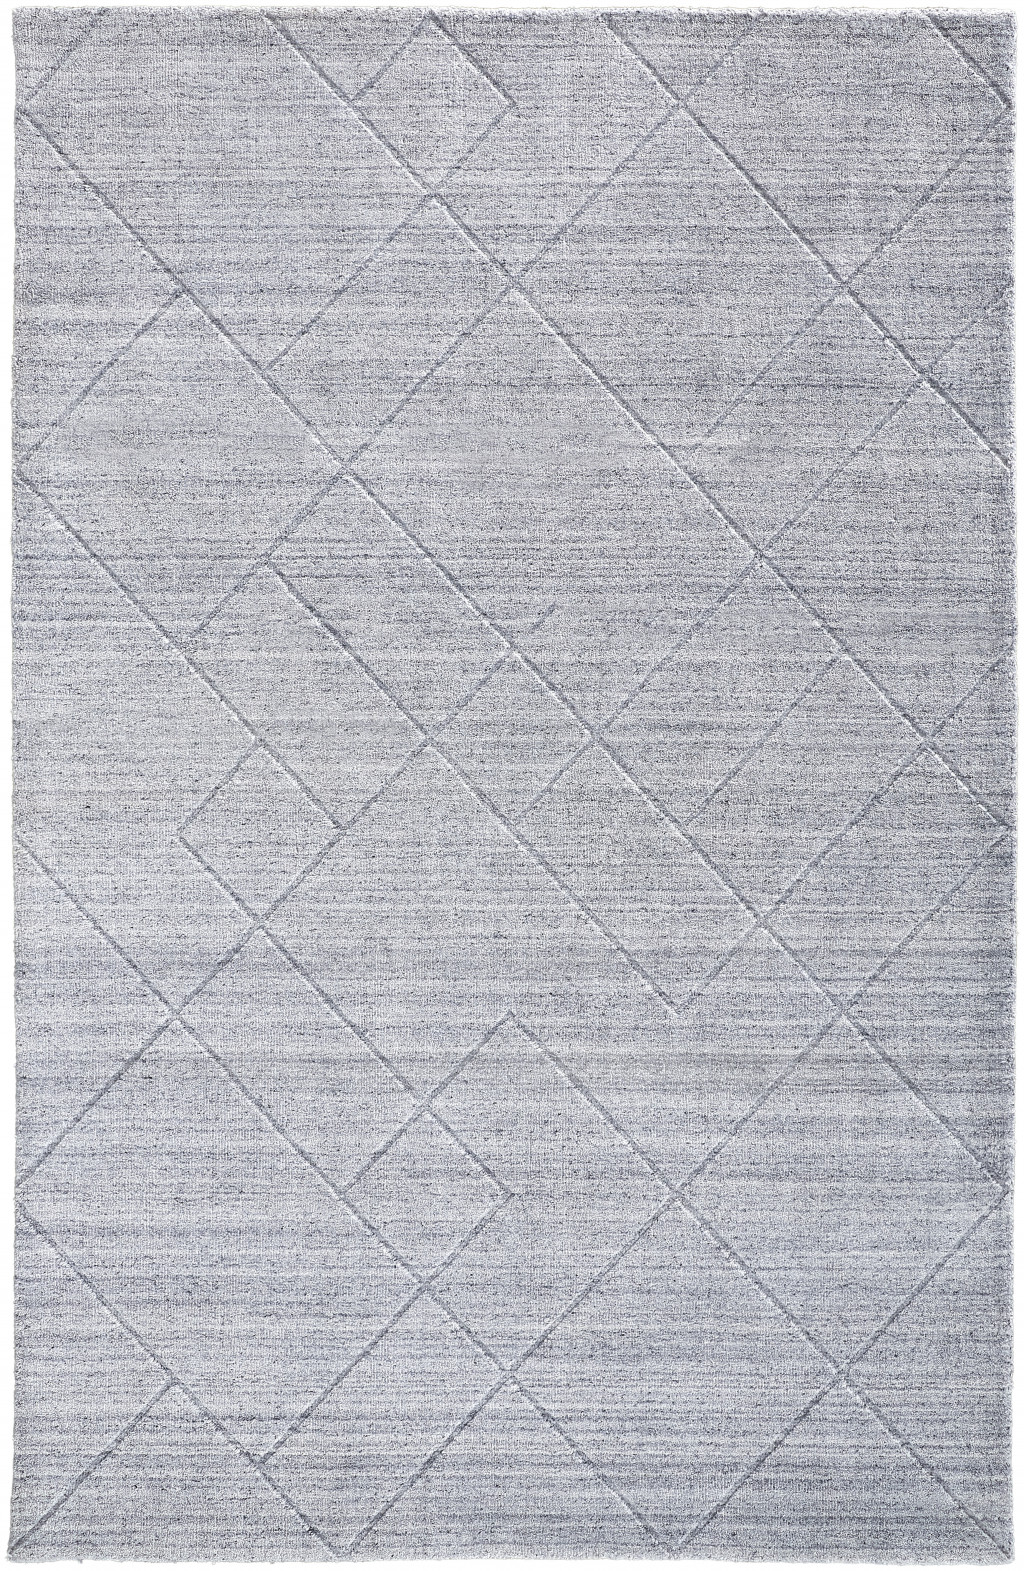 8' X 10' Gray And Silver Striped Hand Woven Area Rug-514793-1